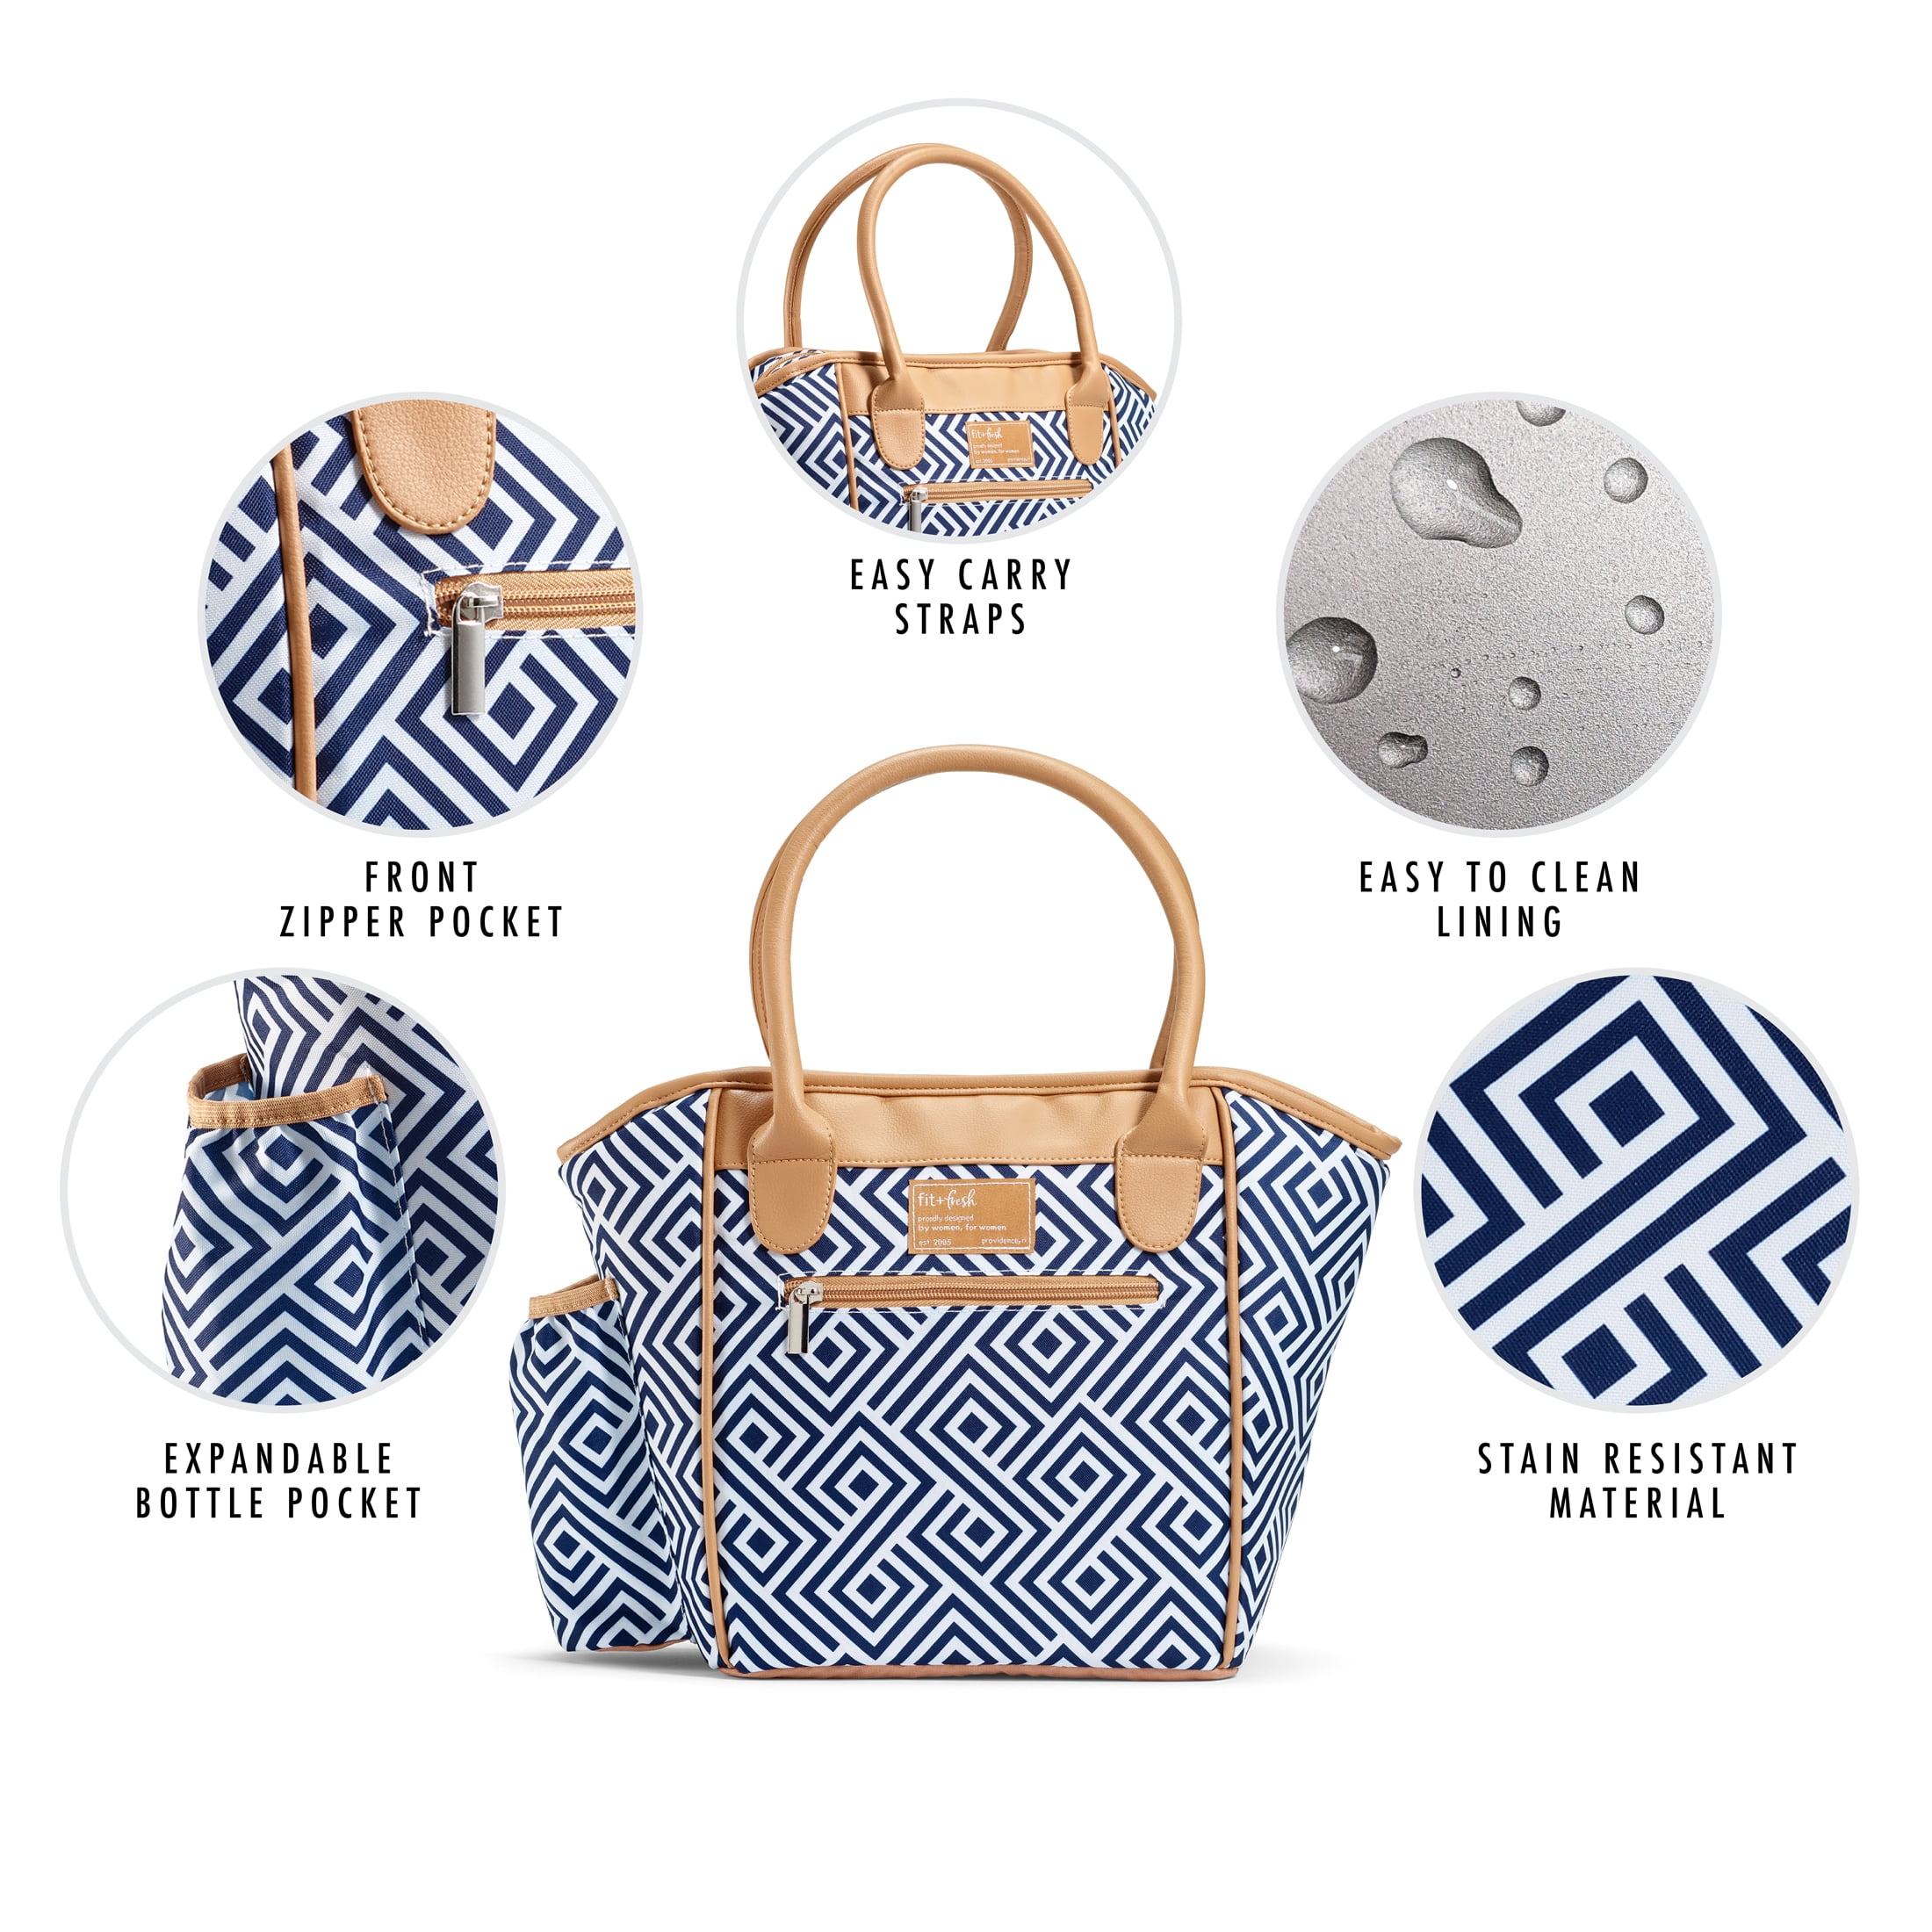 11 Designer Lunch Bags For Ladies- Starting at $23 – topsfordays